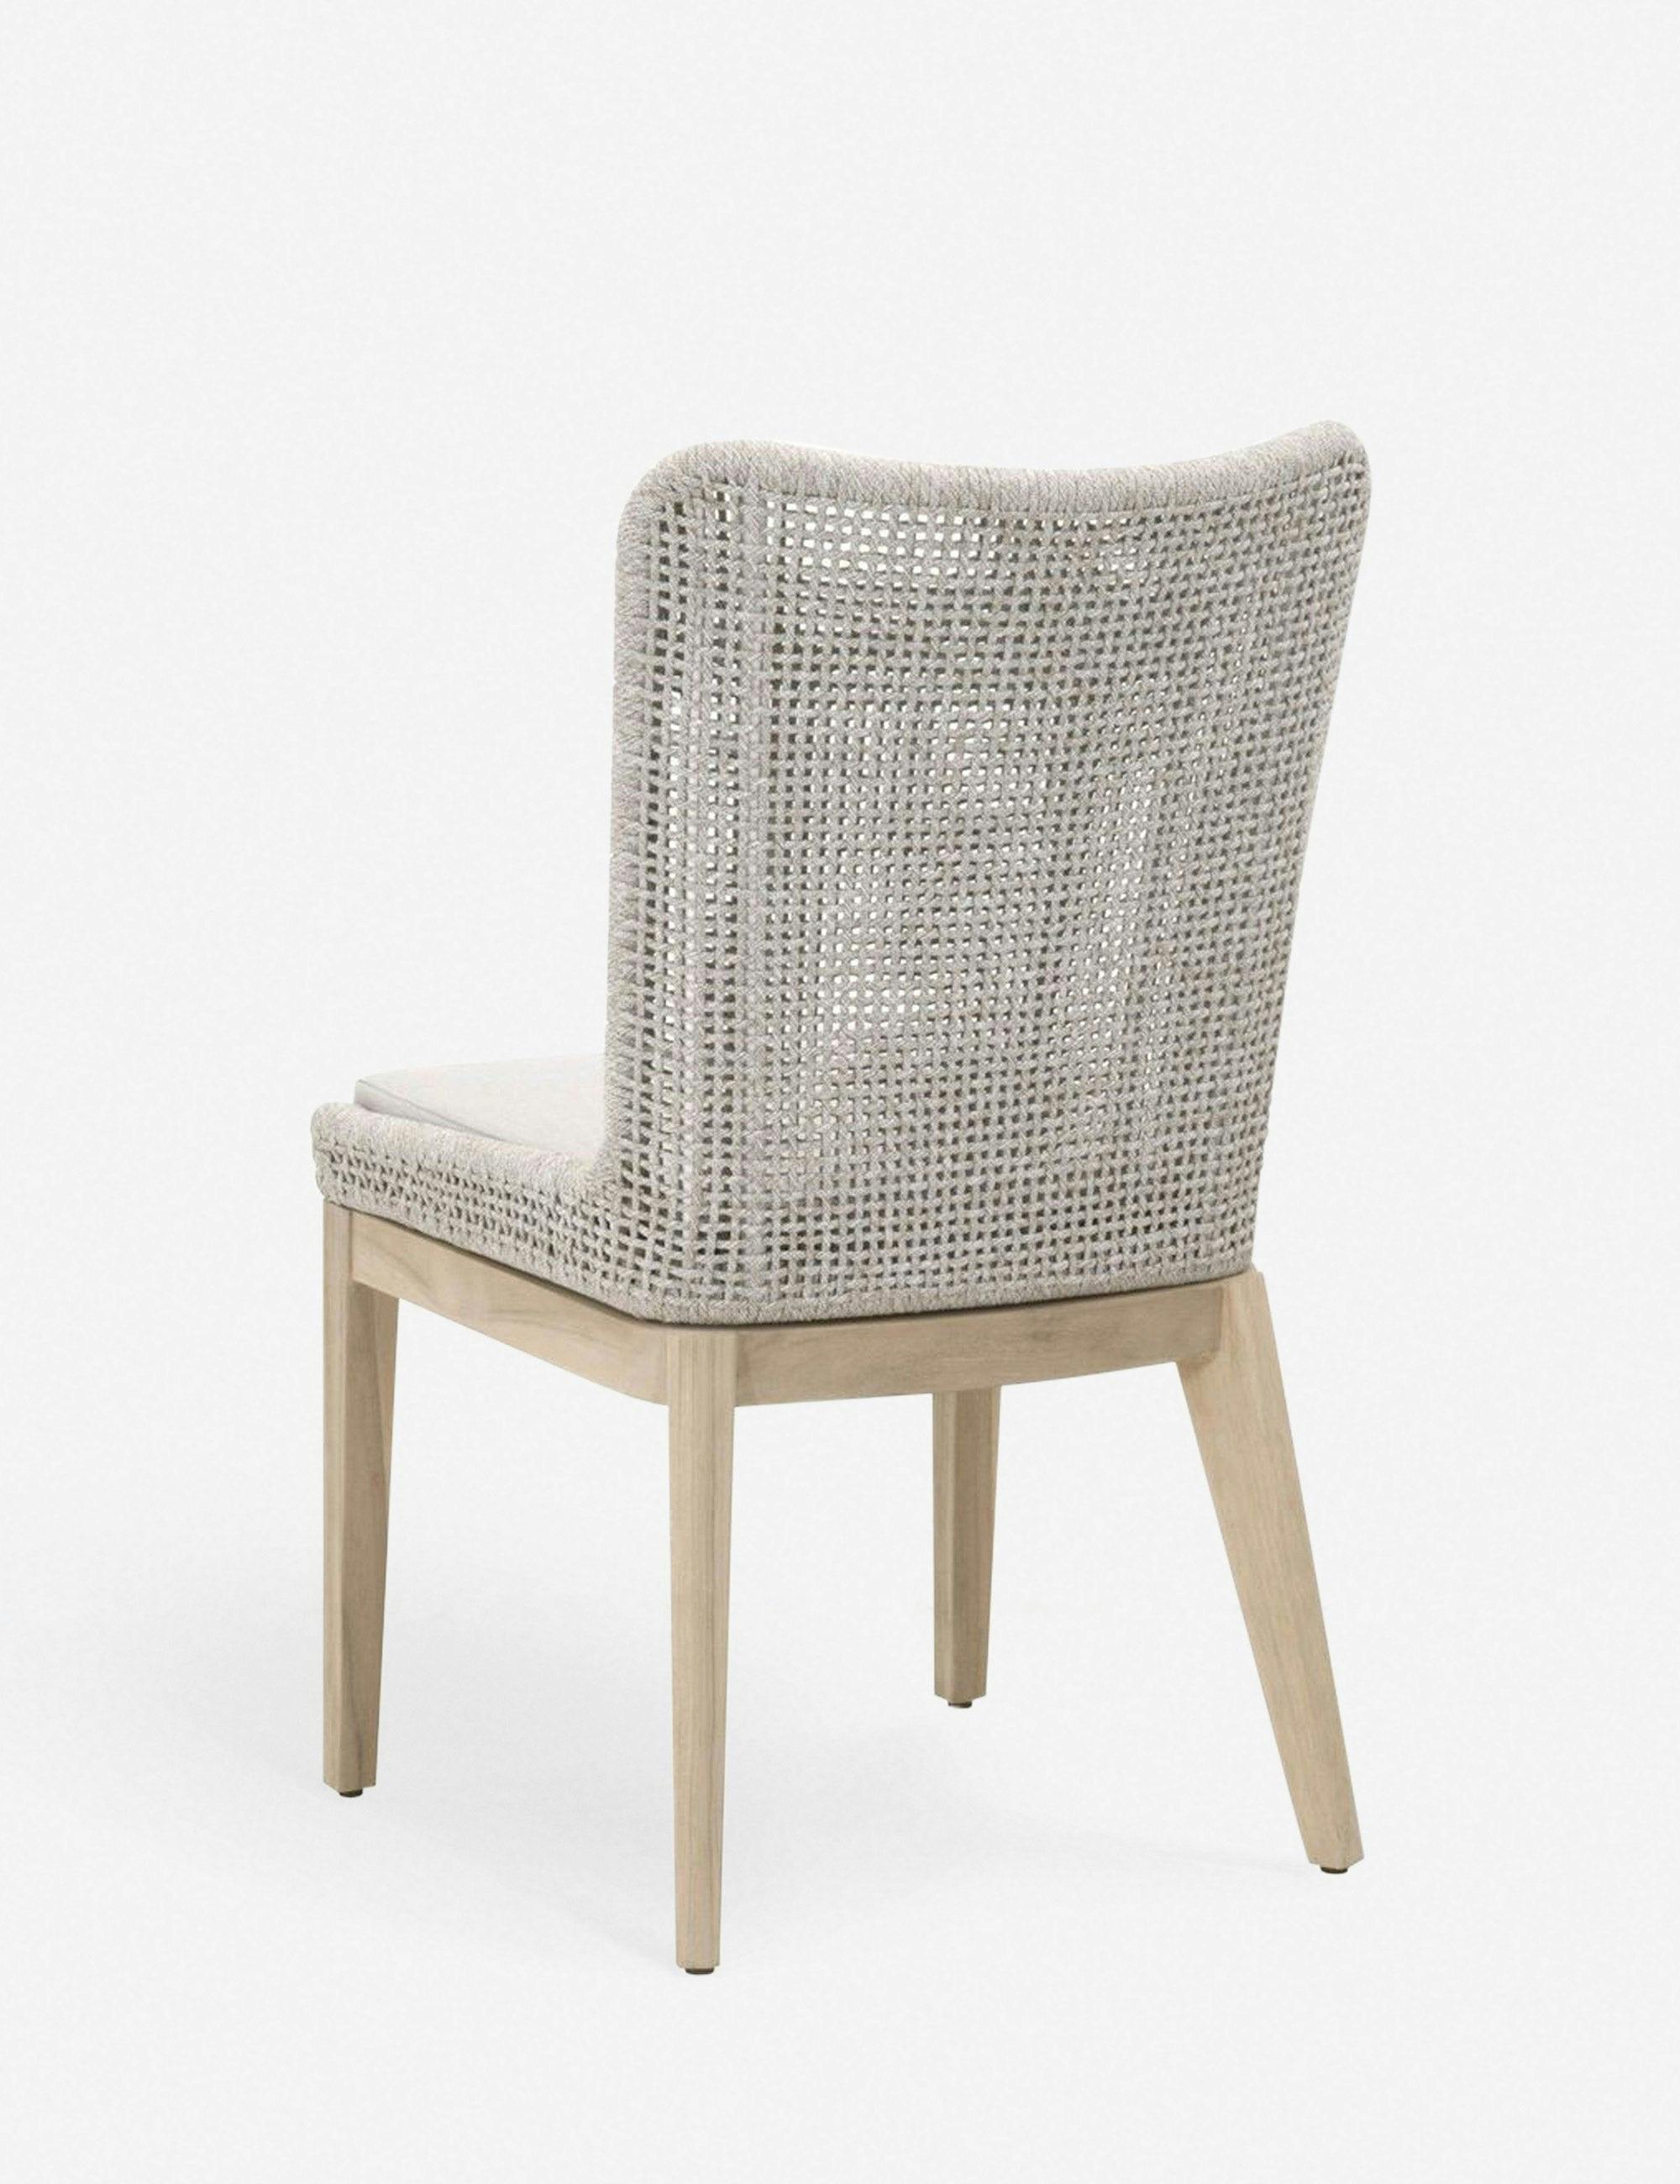 Winnetka Transitional Gray Mesh and Teak Outdoor Dining Chair